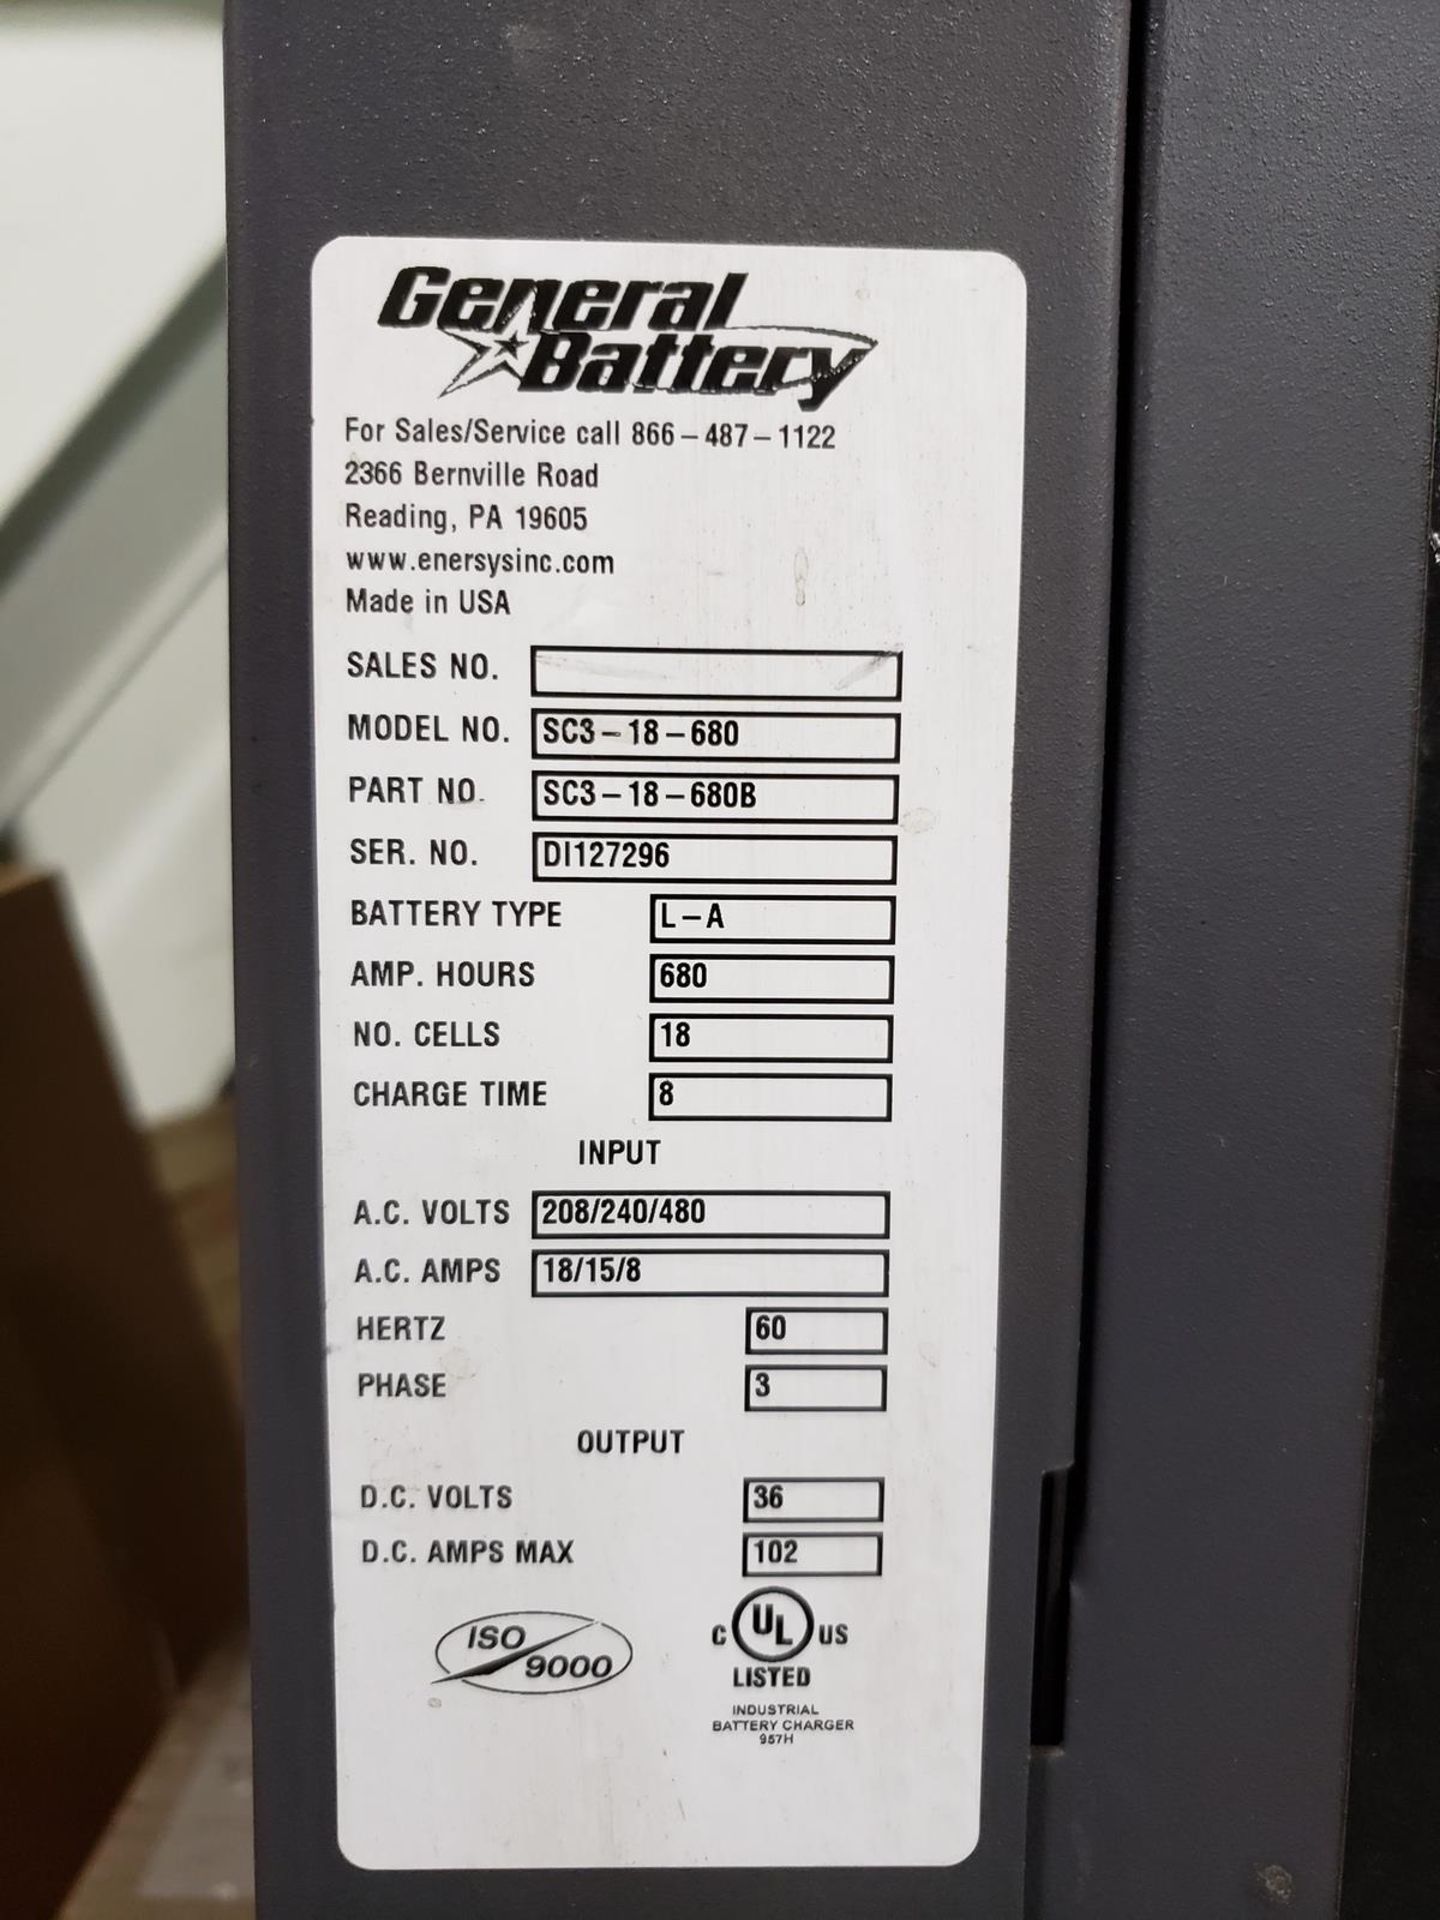 General Battery Charger, 36 Volt, M# SC3-18-680, S/N DI127296 | Rig Fee $100 - Image 2 of 2